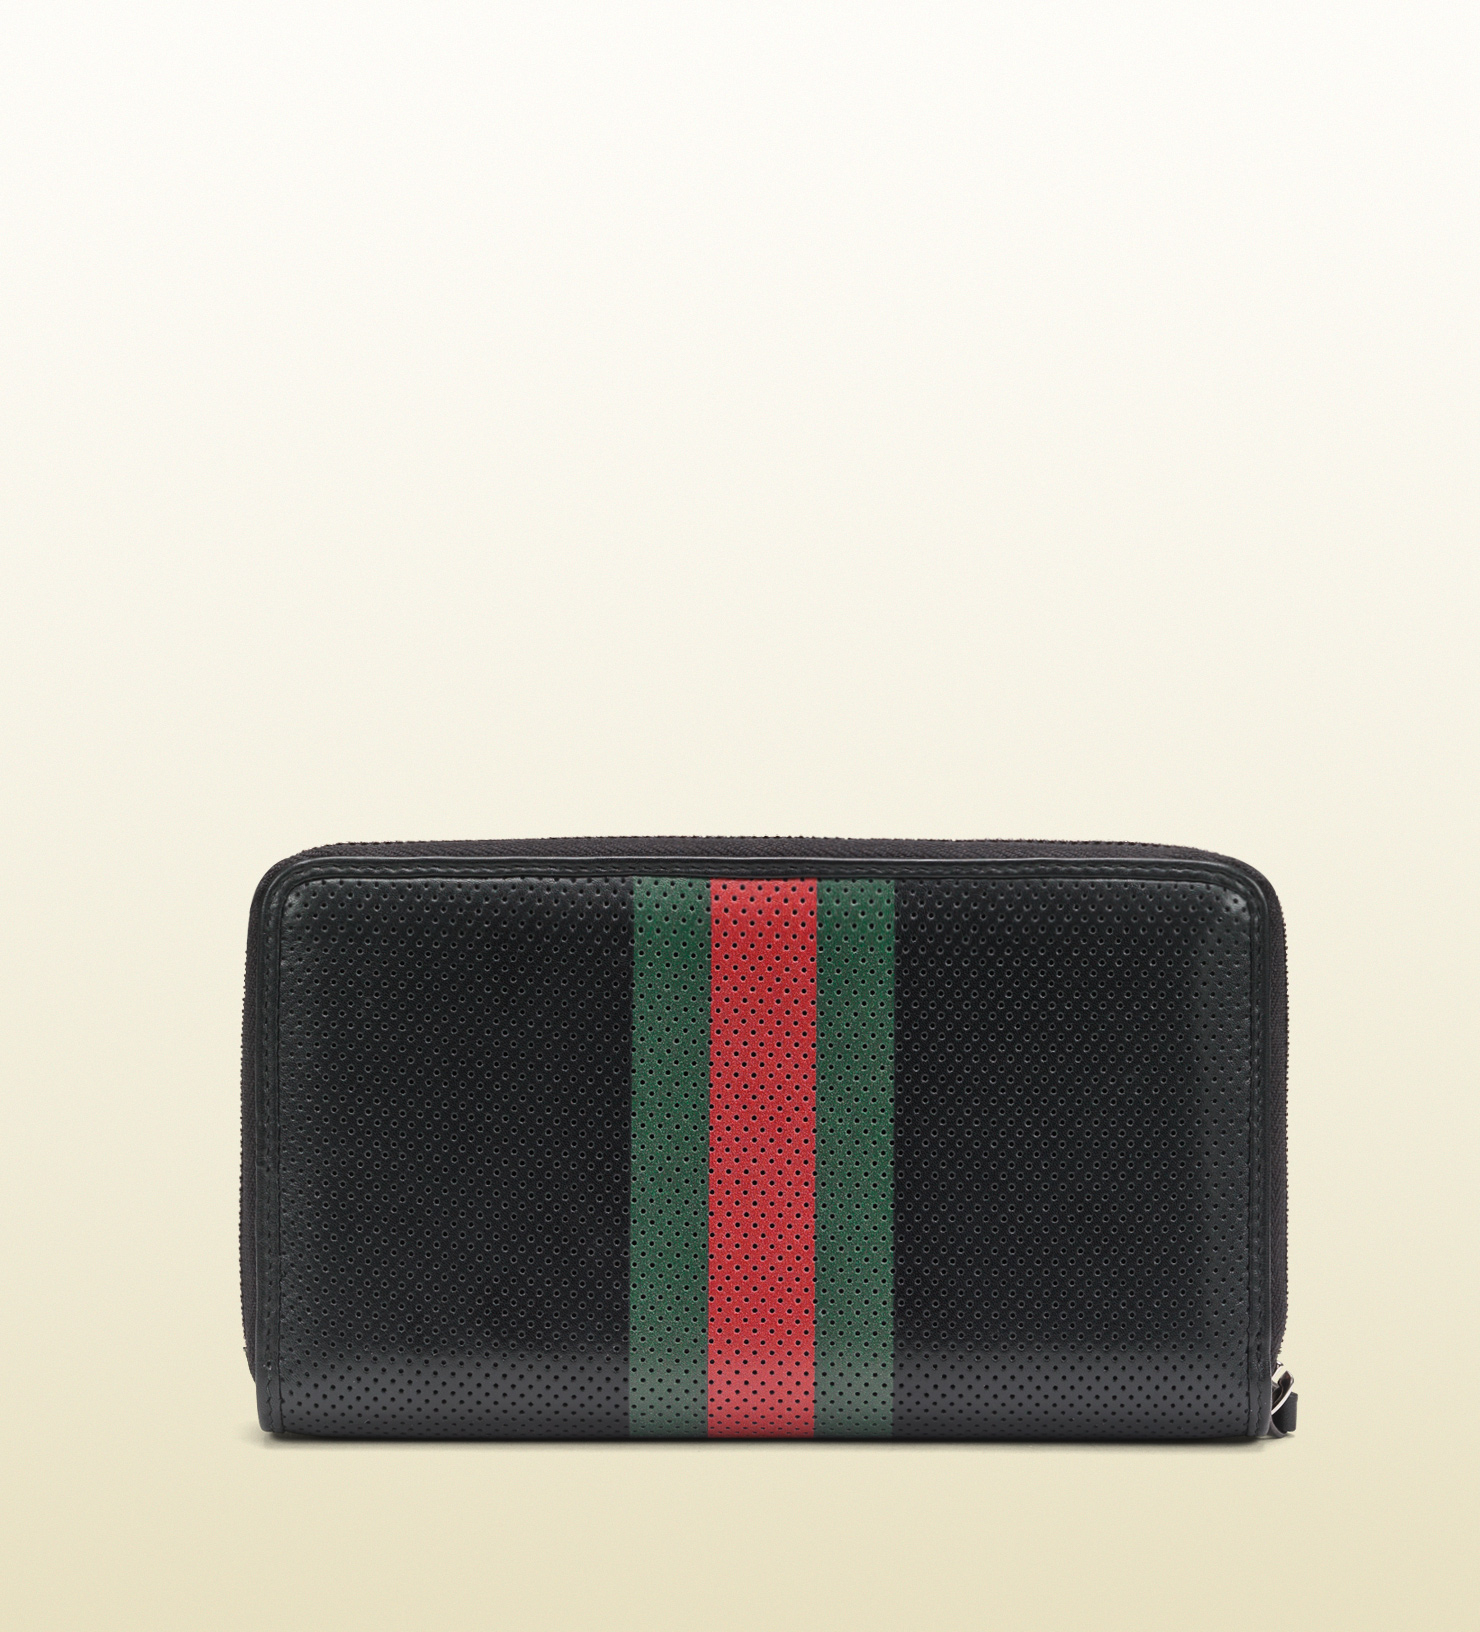 Lyst - Gucci Perforated Leather Web Zip Around Wallet in Black for Men